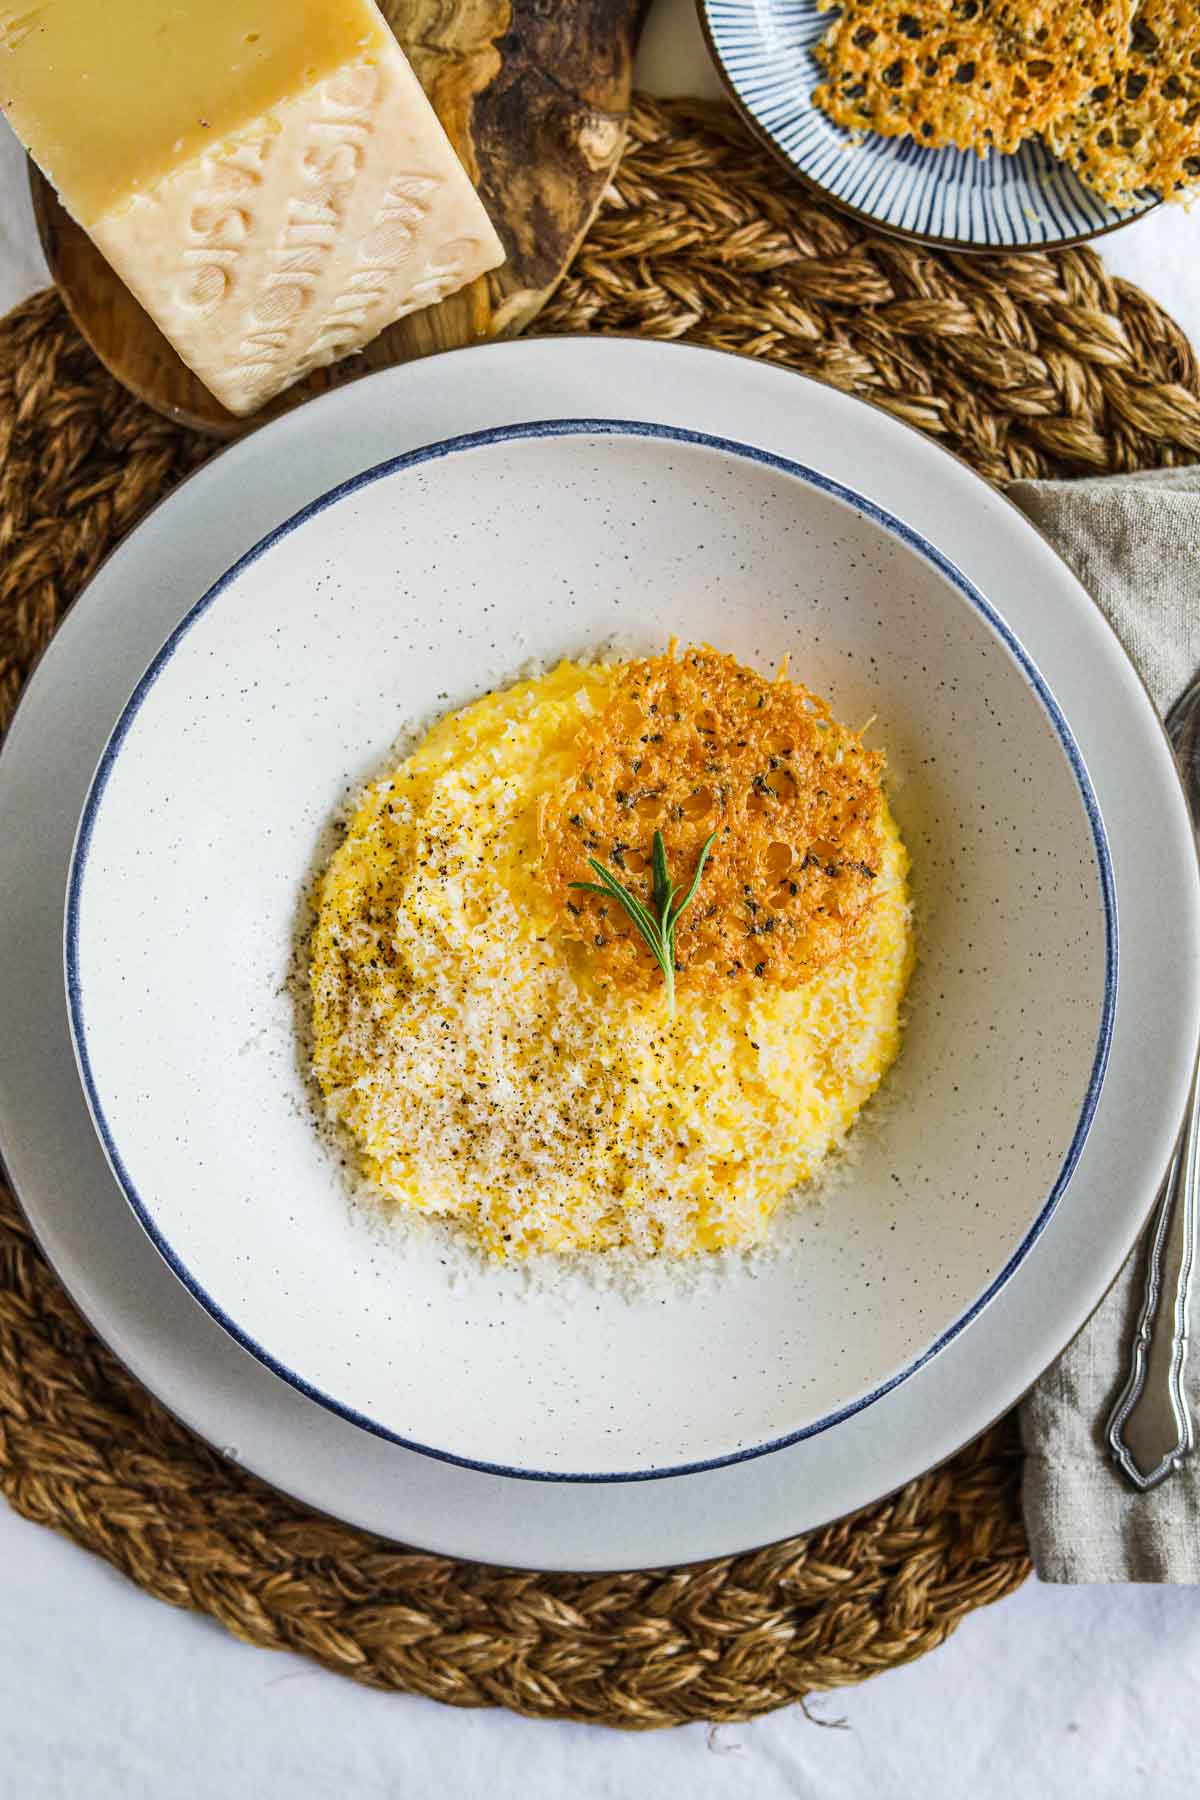 Creamy polenta with parmigiano-reggiano, rosemary, and frico (montasio cheese crisps) in a bowl.